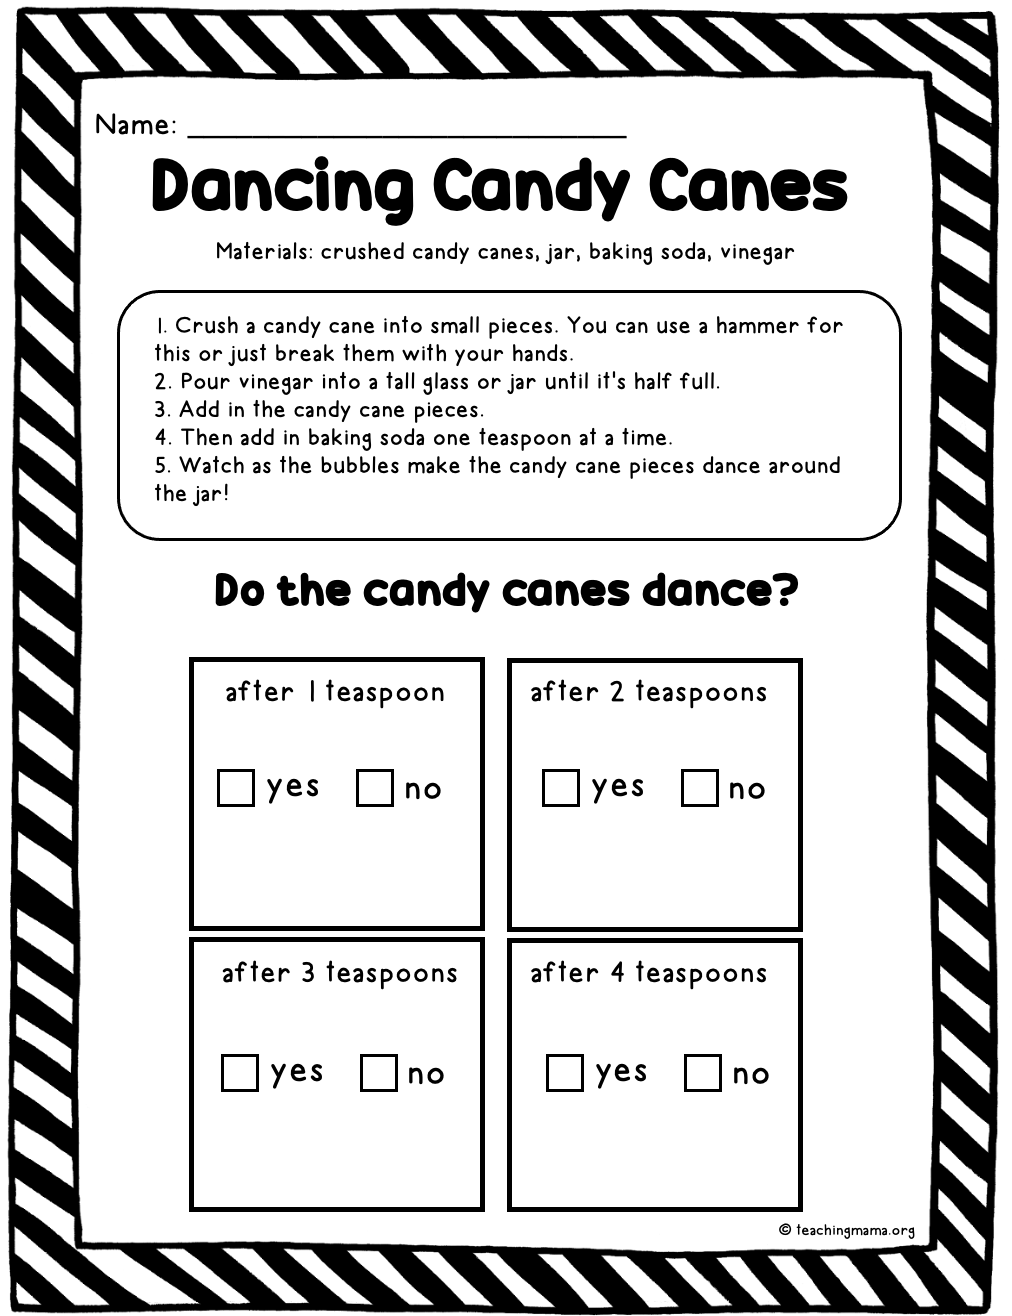 dancing candy canes activity